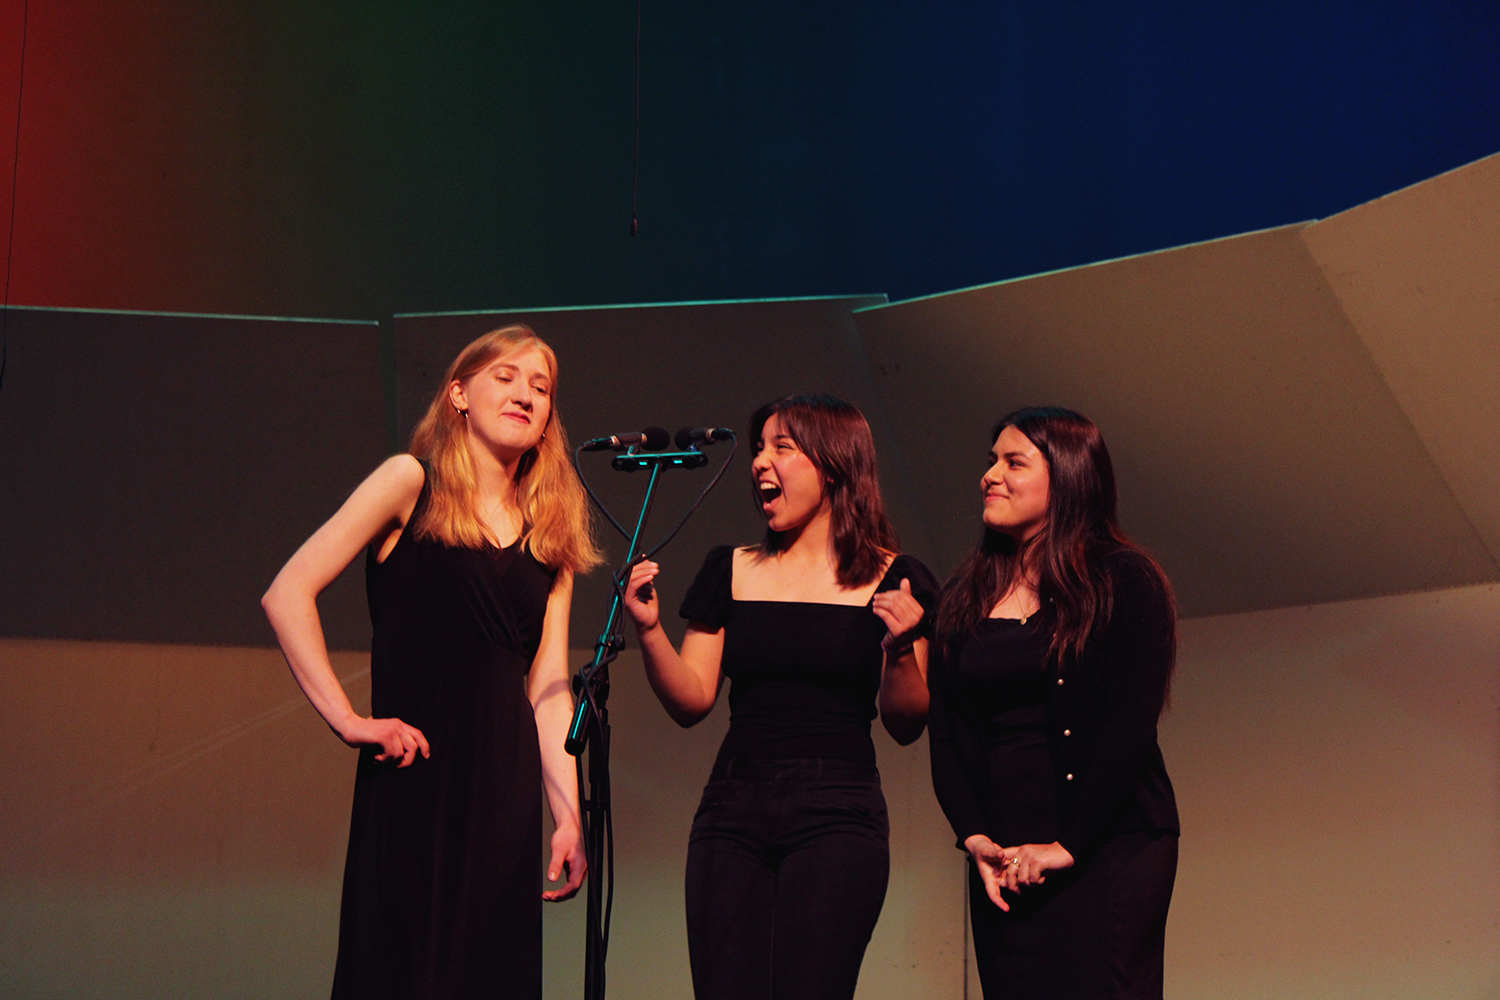 Aislinn Wilson, Nicole Barger, and Valeria Tiburcio Romo (from left to right) sing 9 to 5.